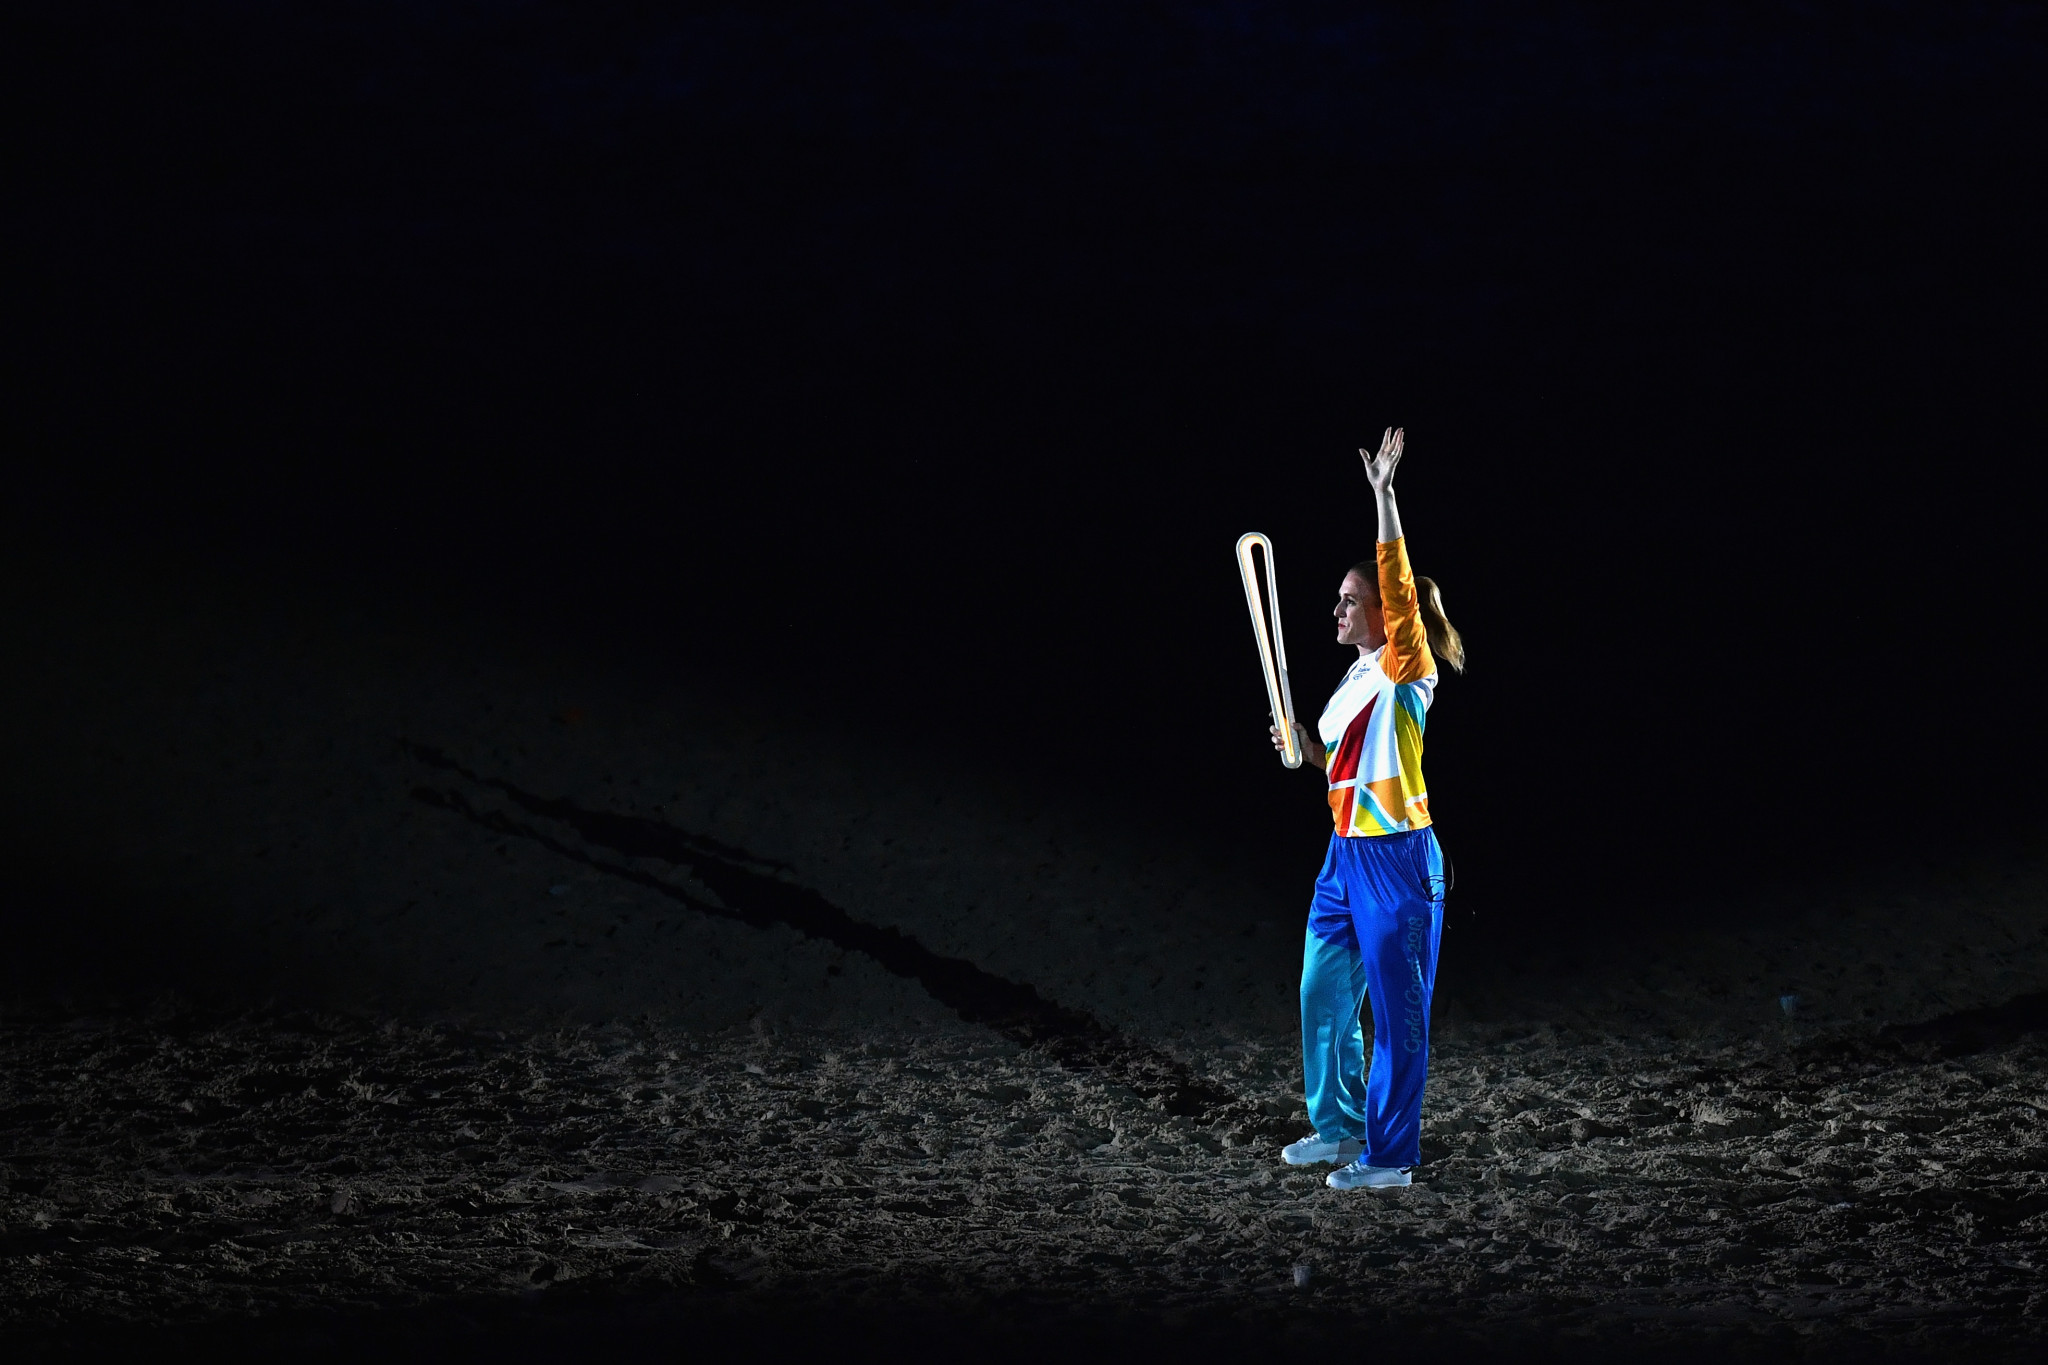 Sally Pearson was the last person to carry the Baton at the Opening Ceremony ©Getty Images